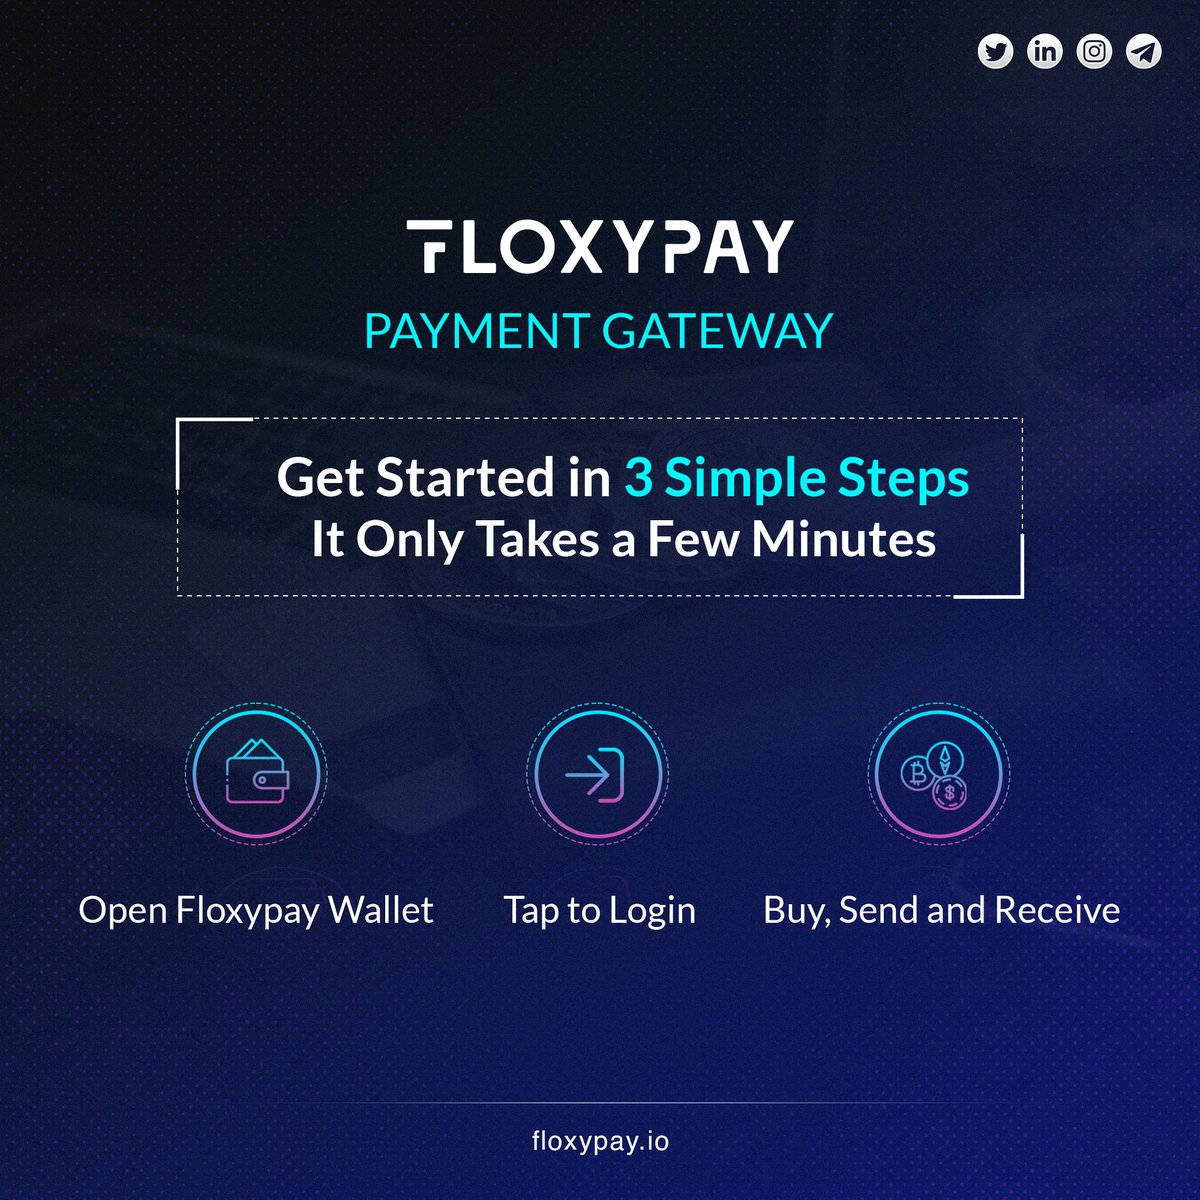 Set up your crypto game with Floxypay! 🚀🌟
Join the revolution now! 💰💸
.
.
.
#Floxypay #CryptoMadeEasy #GetStartedToday 
#cryptocurrencies #cryptopaymentgateway